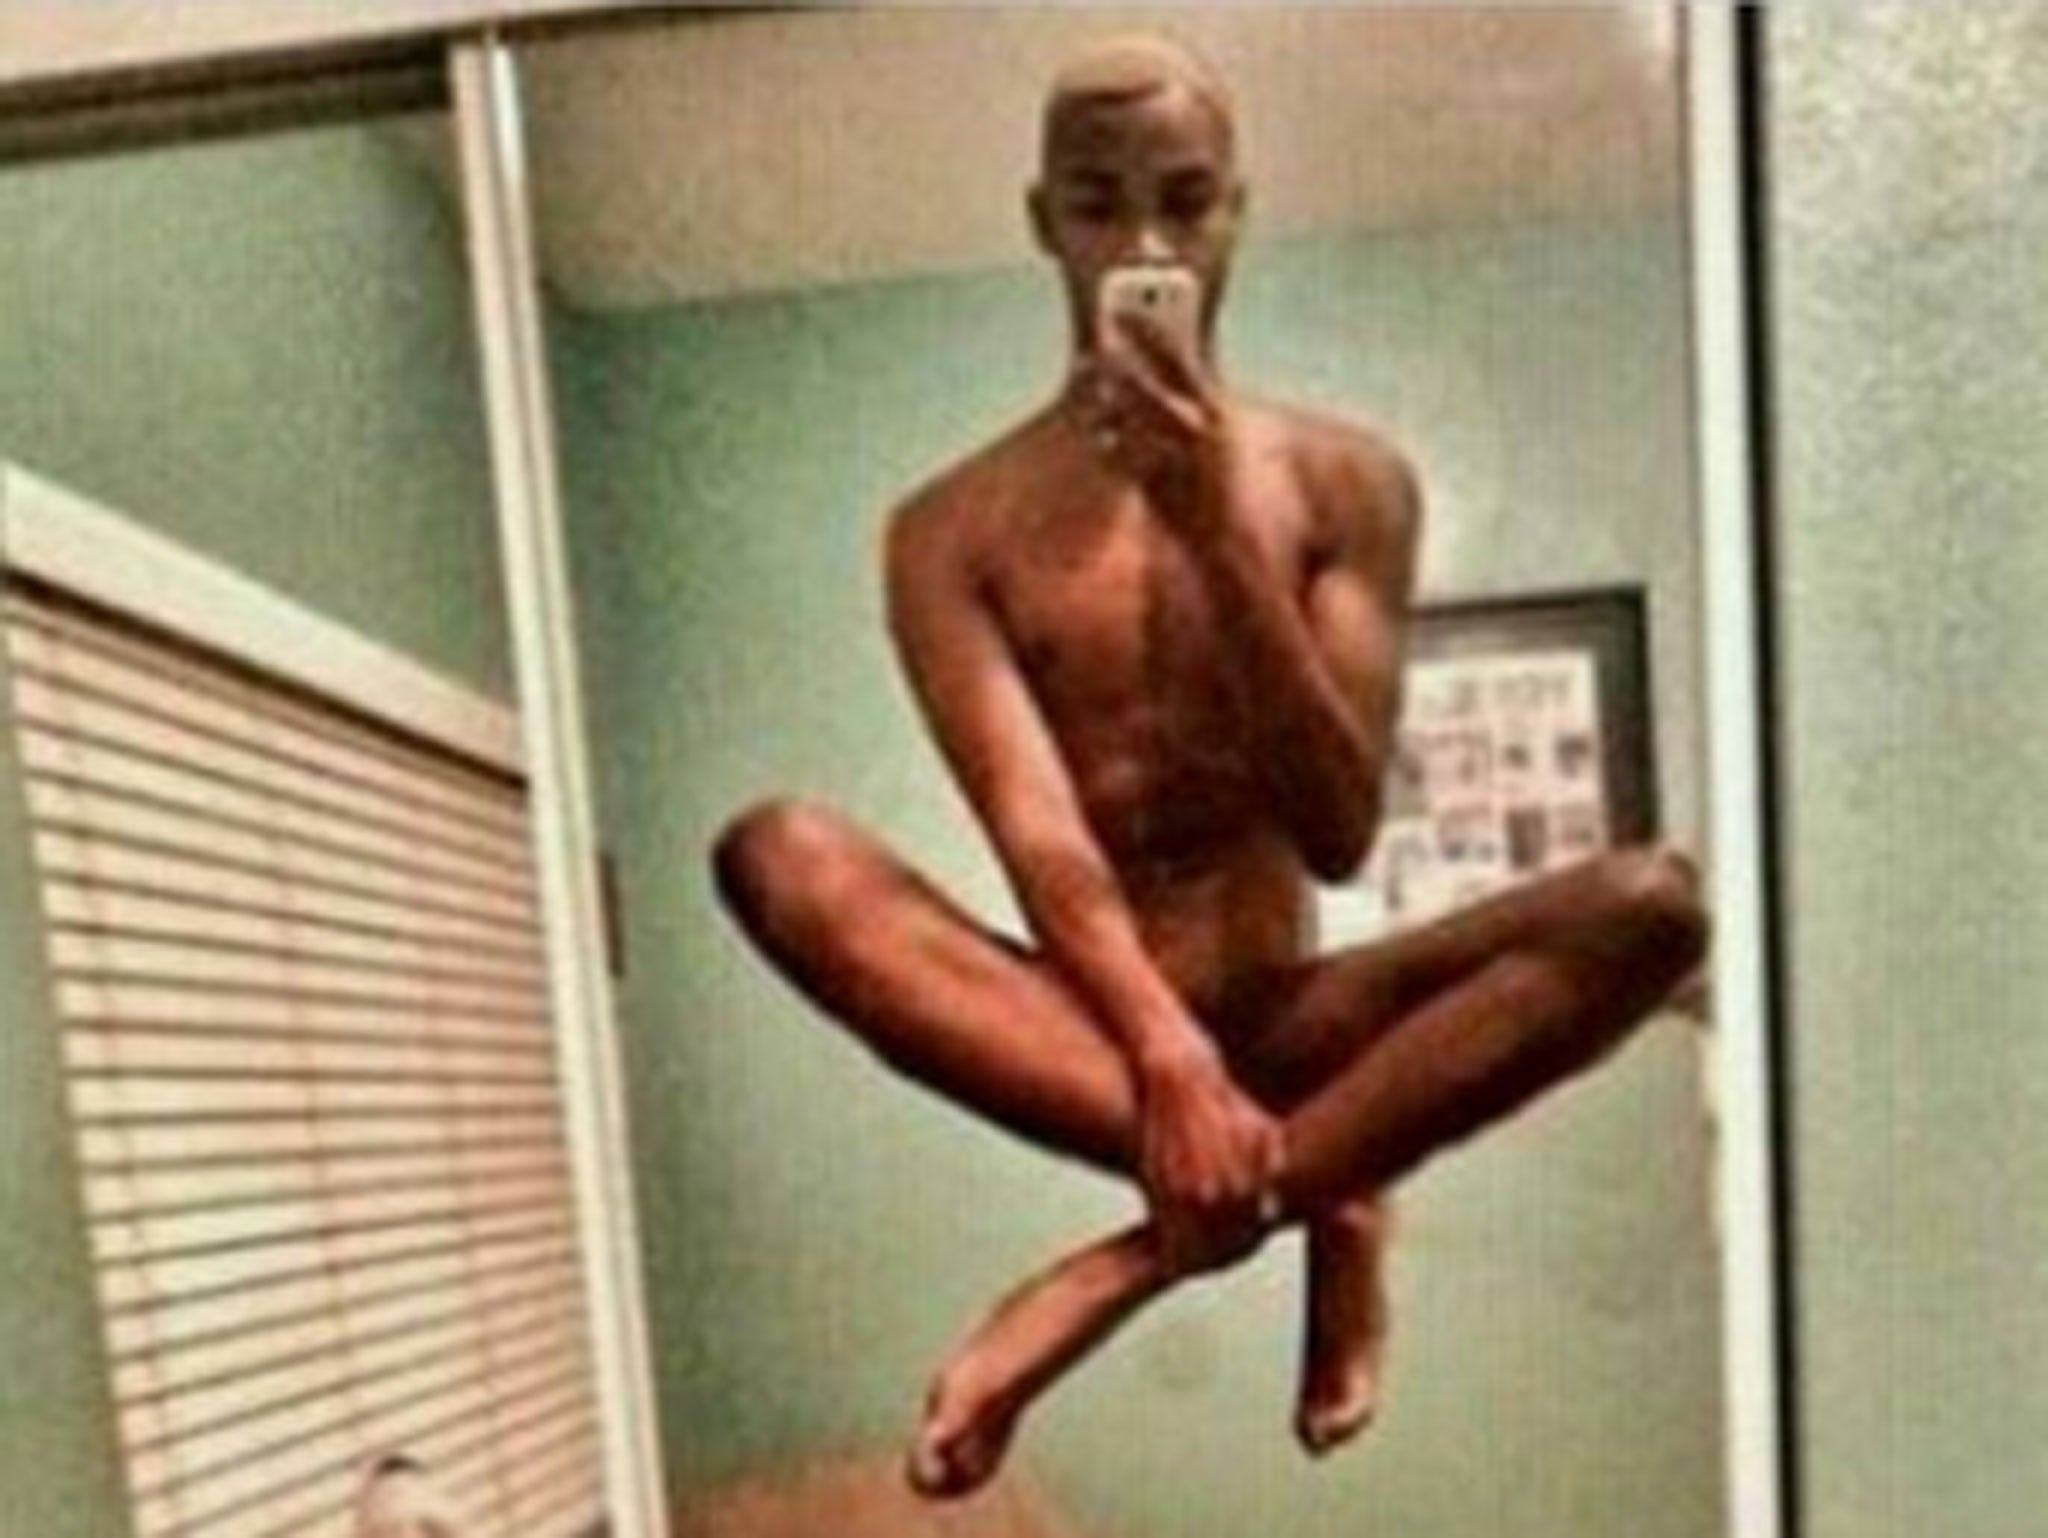 A man competes in the Selfie Olympics